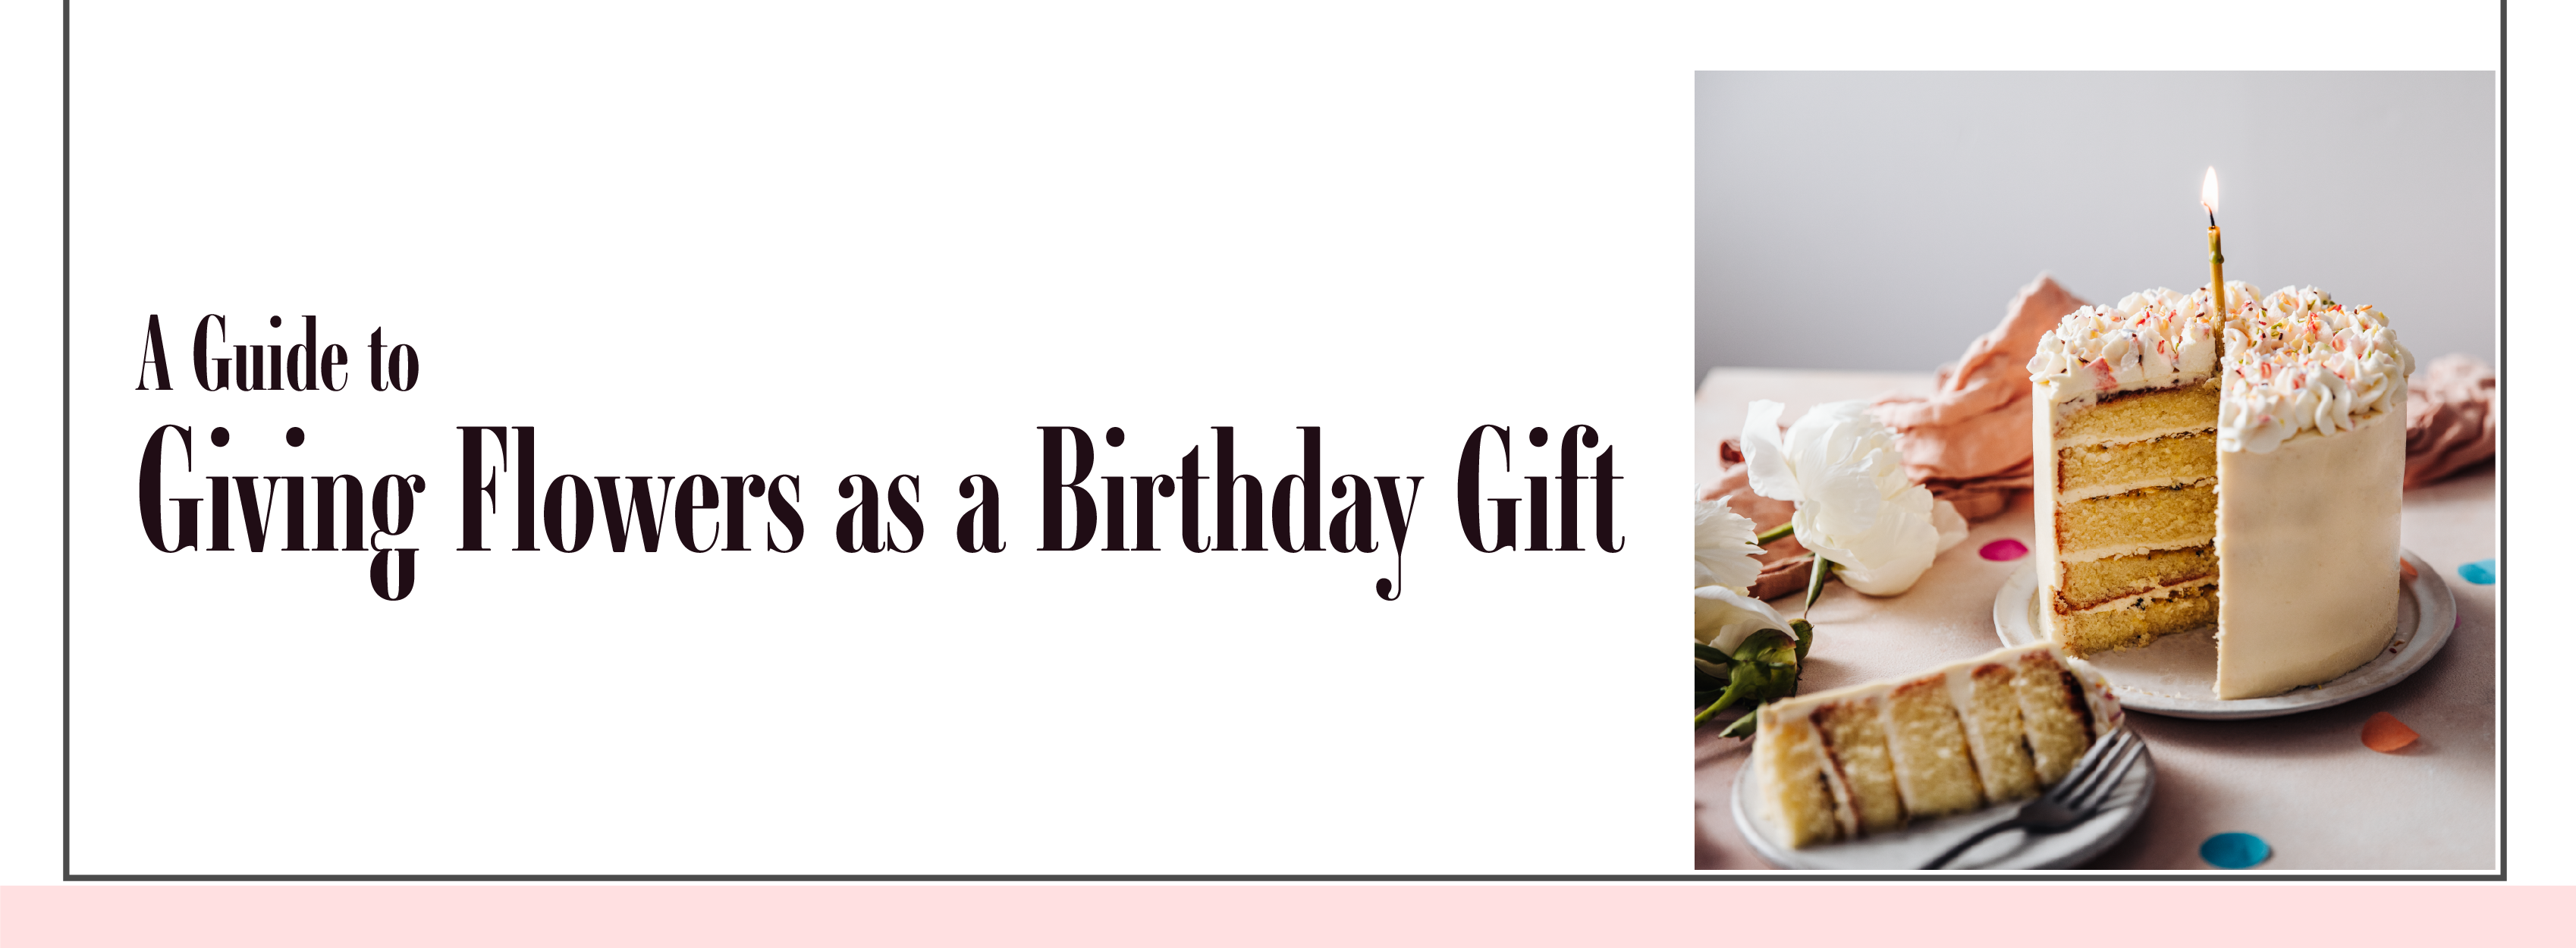 Guide to giving flowers as a birthday gift